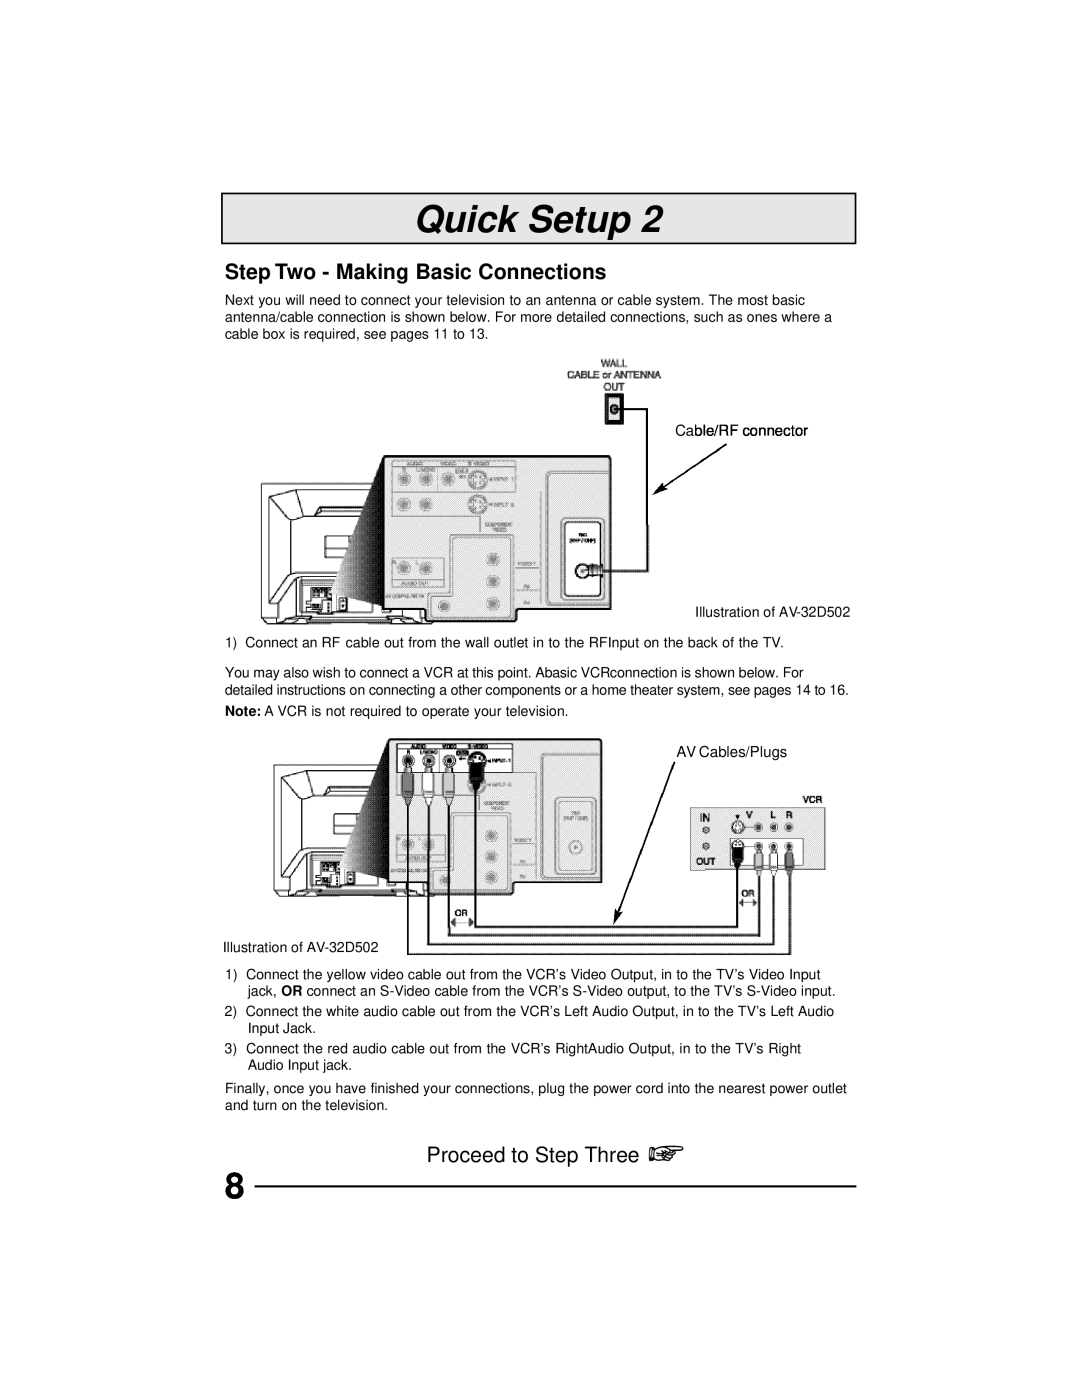 JVC AV 36D502, AV 36D202, AV 36D302, AV 32D302 manual Step Two - Making Basic Connections, Quick Setup, Proceed to Step Three 